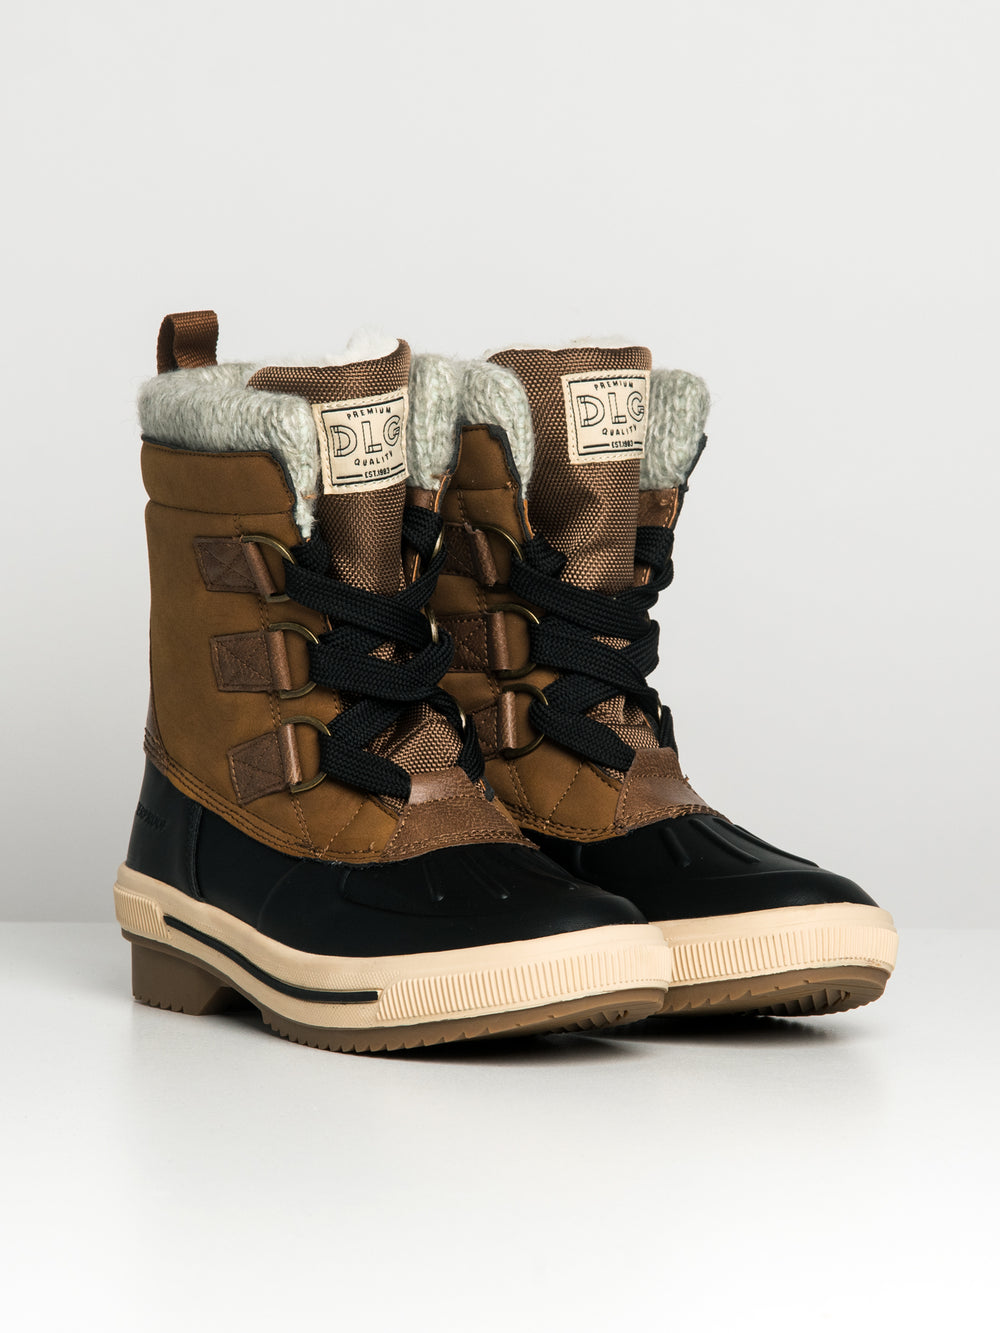 WOMENS DLG NAOMI Boot - CLEARANCE